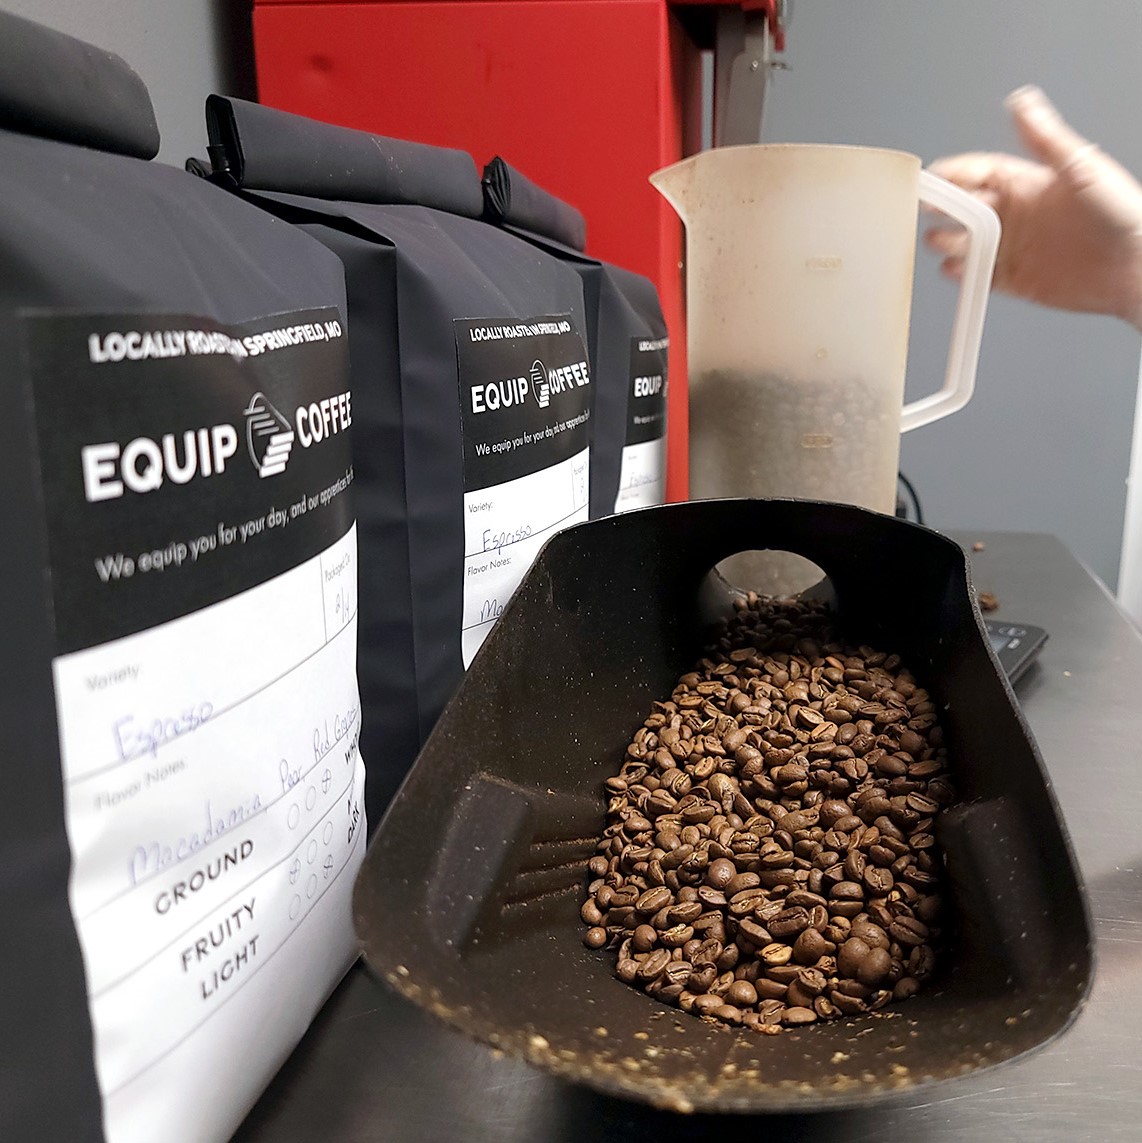 Coffee beans sit in a scale next to bags of Equip Coffee